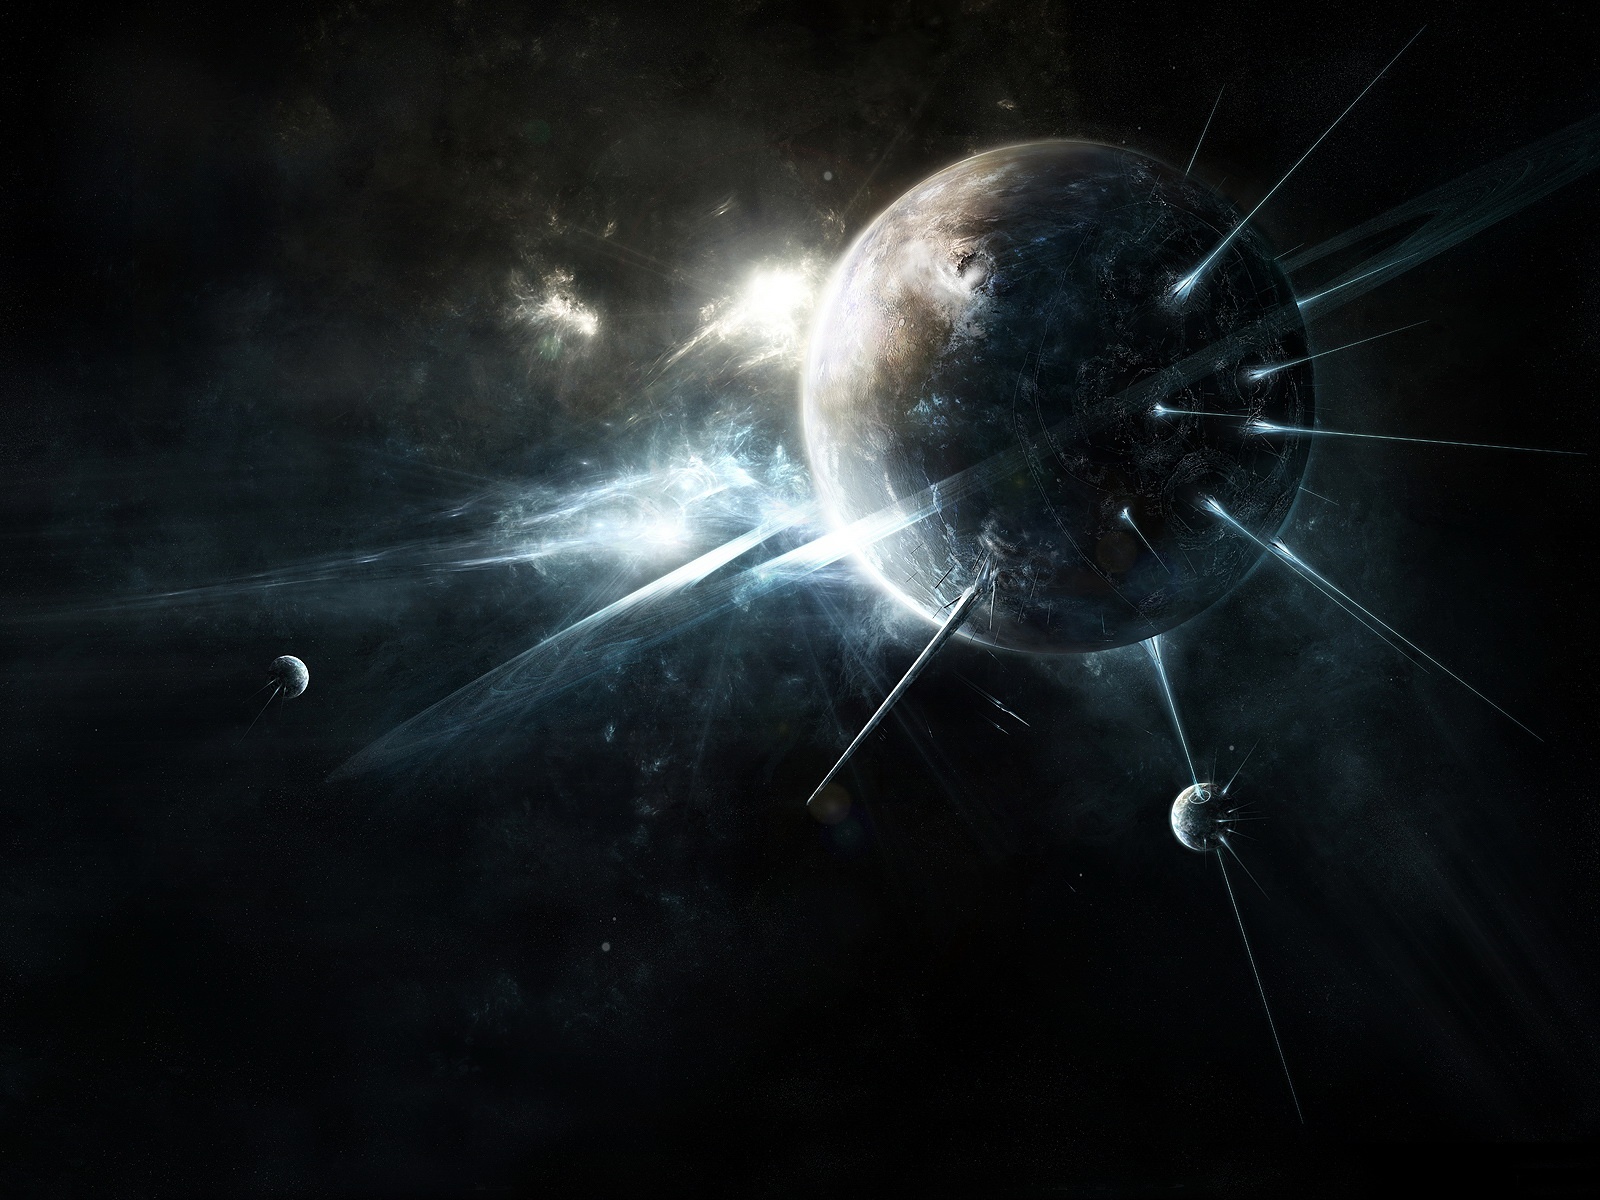 Dark Space Abstract Wallpaper in jpg format for free download